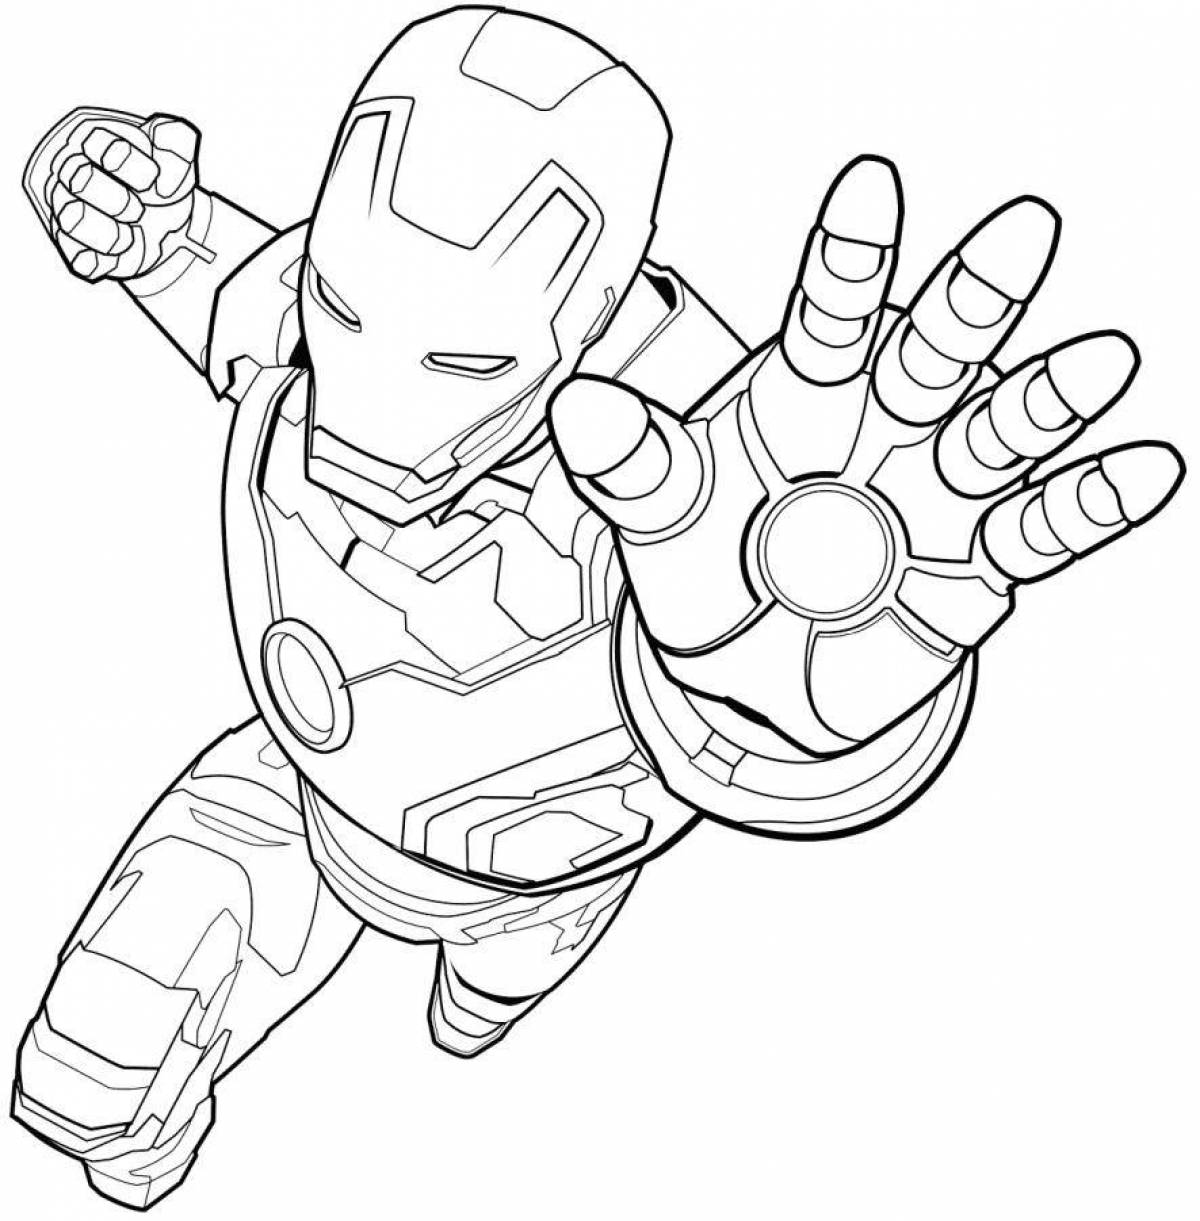 Exquisite coloring iron man for boys